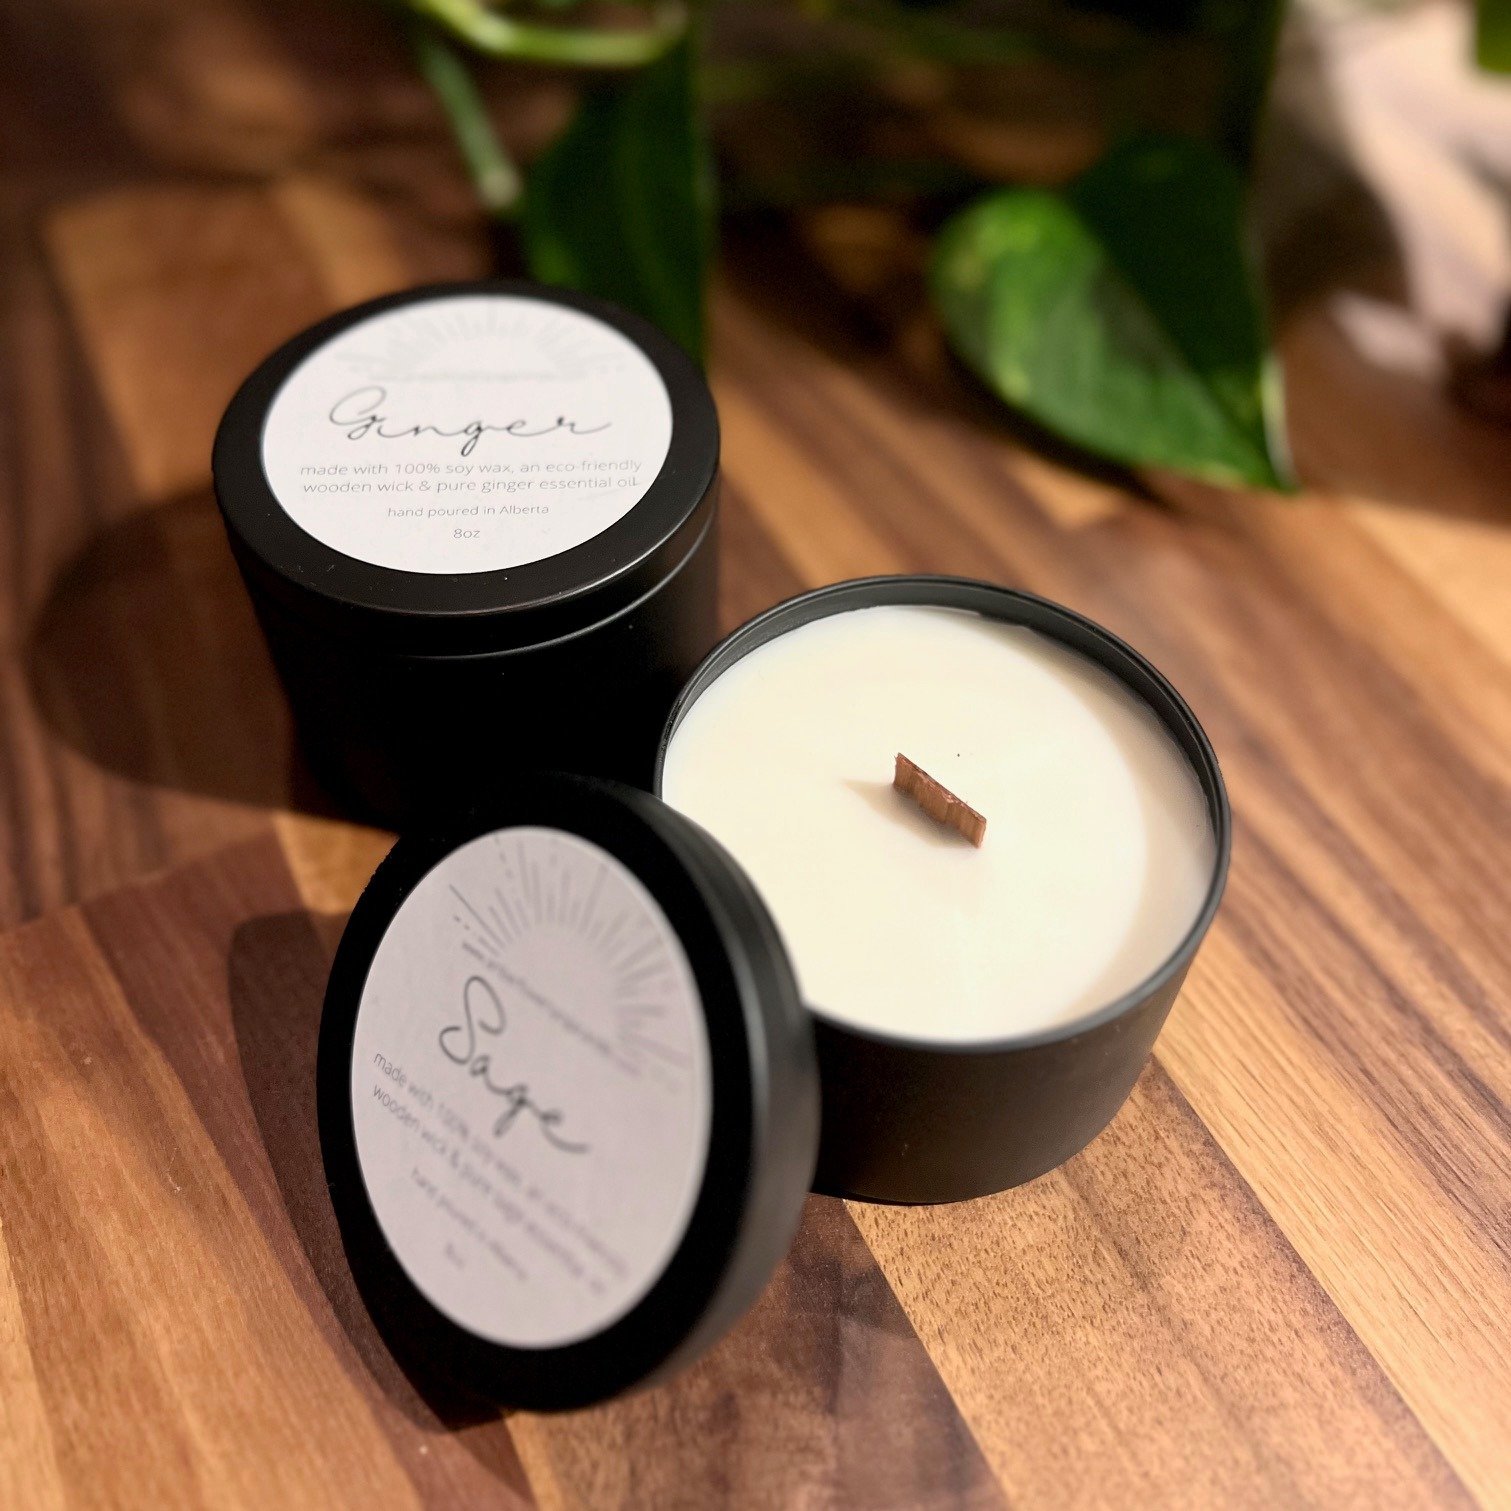 Check out these Non-toxic Soy Wax Candles in Prop Shop✨

These hand-poured soy wax candles are made locally with essential oils. The pooled wax can be used as a hand moisturizer. Burn time of 35-40 hours.🧘

Online + in store at @ciy_houseofyoga. We 